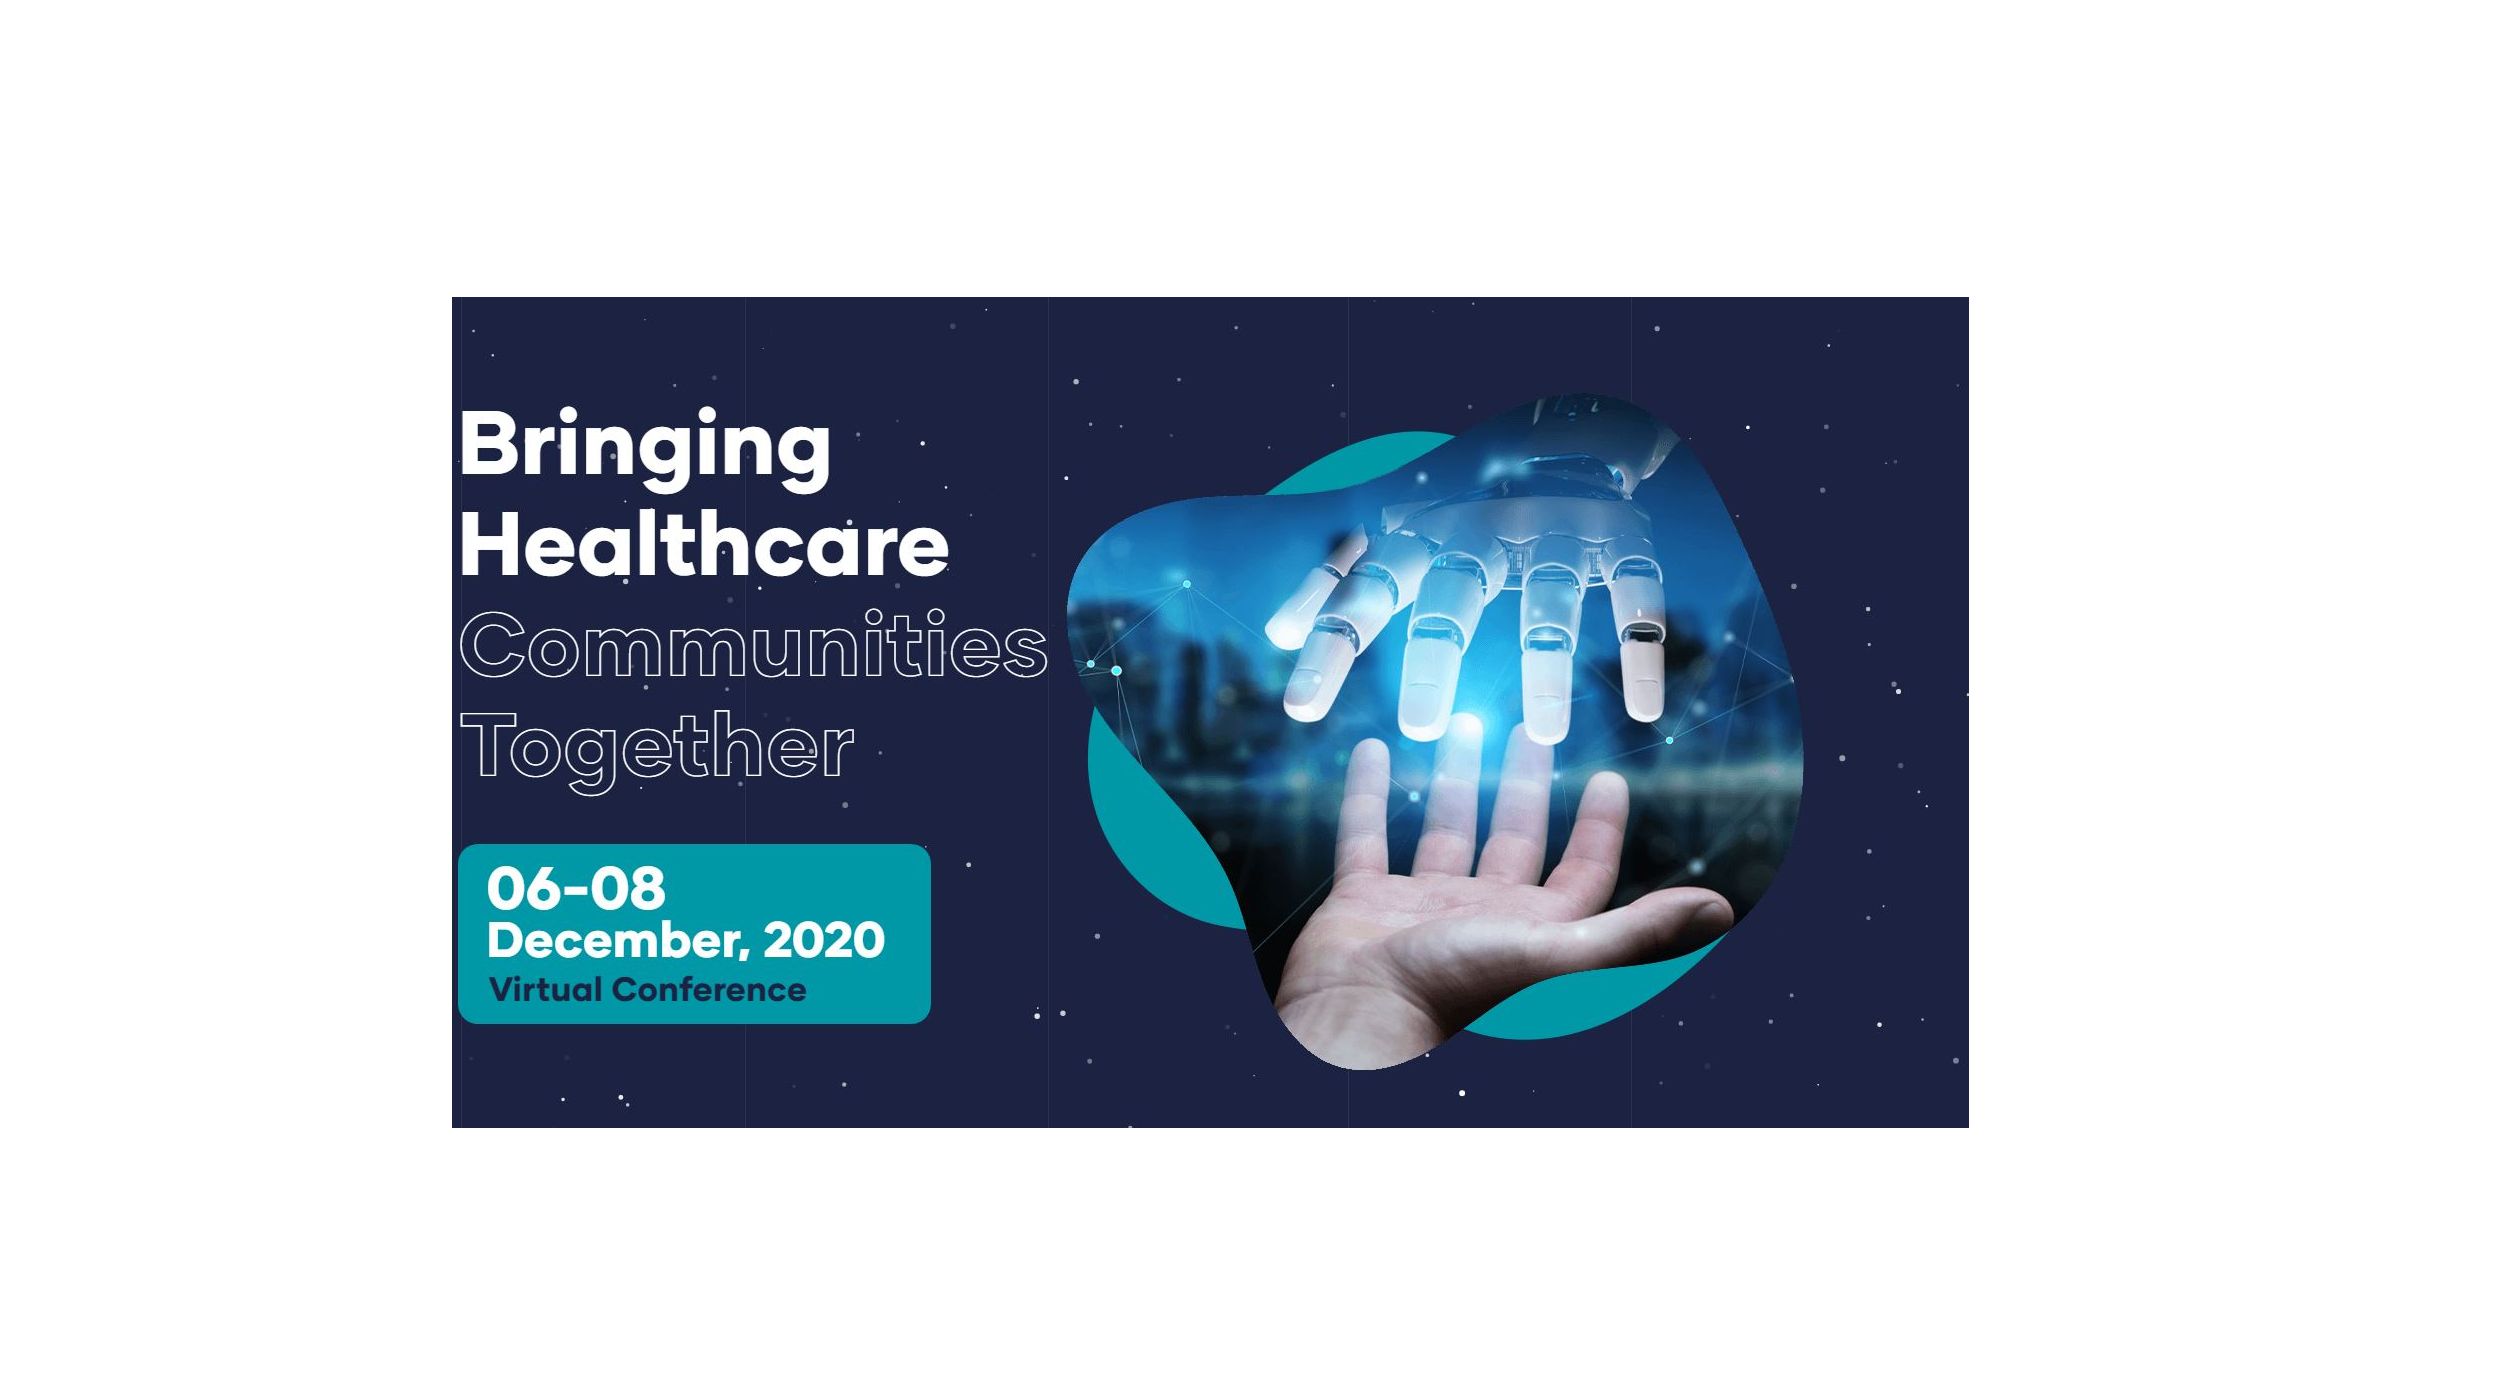 Dubai To Organise Healthcare Future Summit For Medical Research and Pandemic Care Solutions